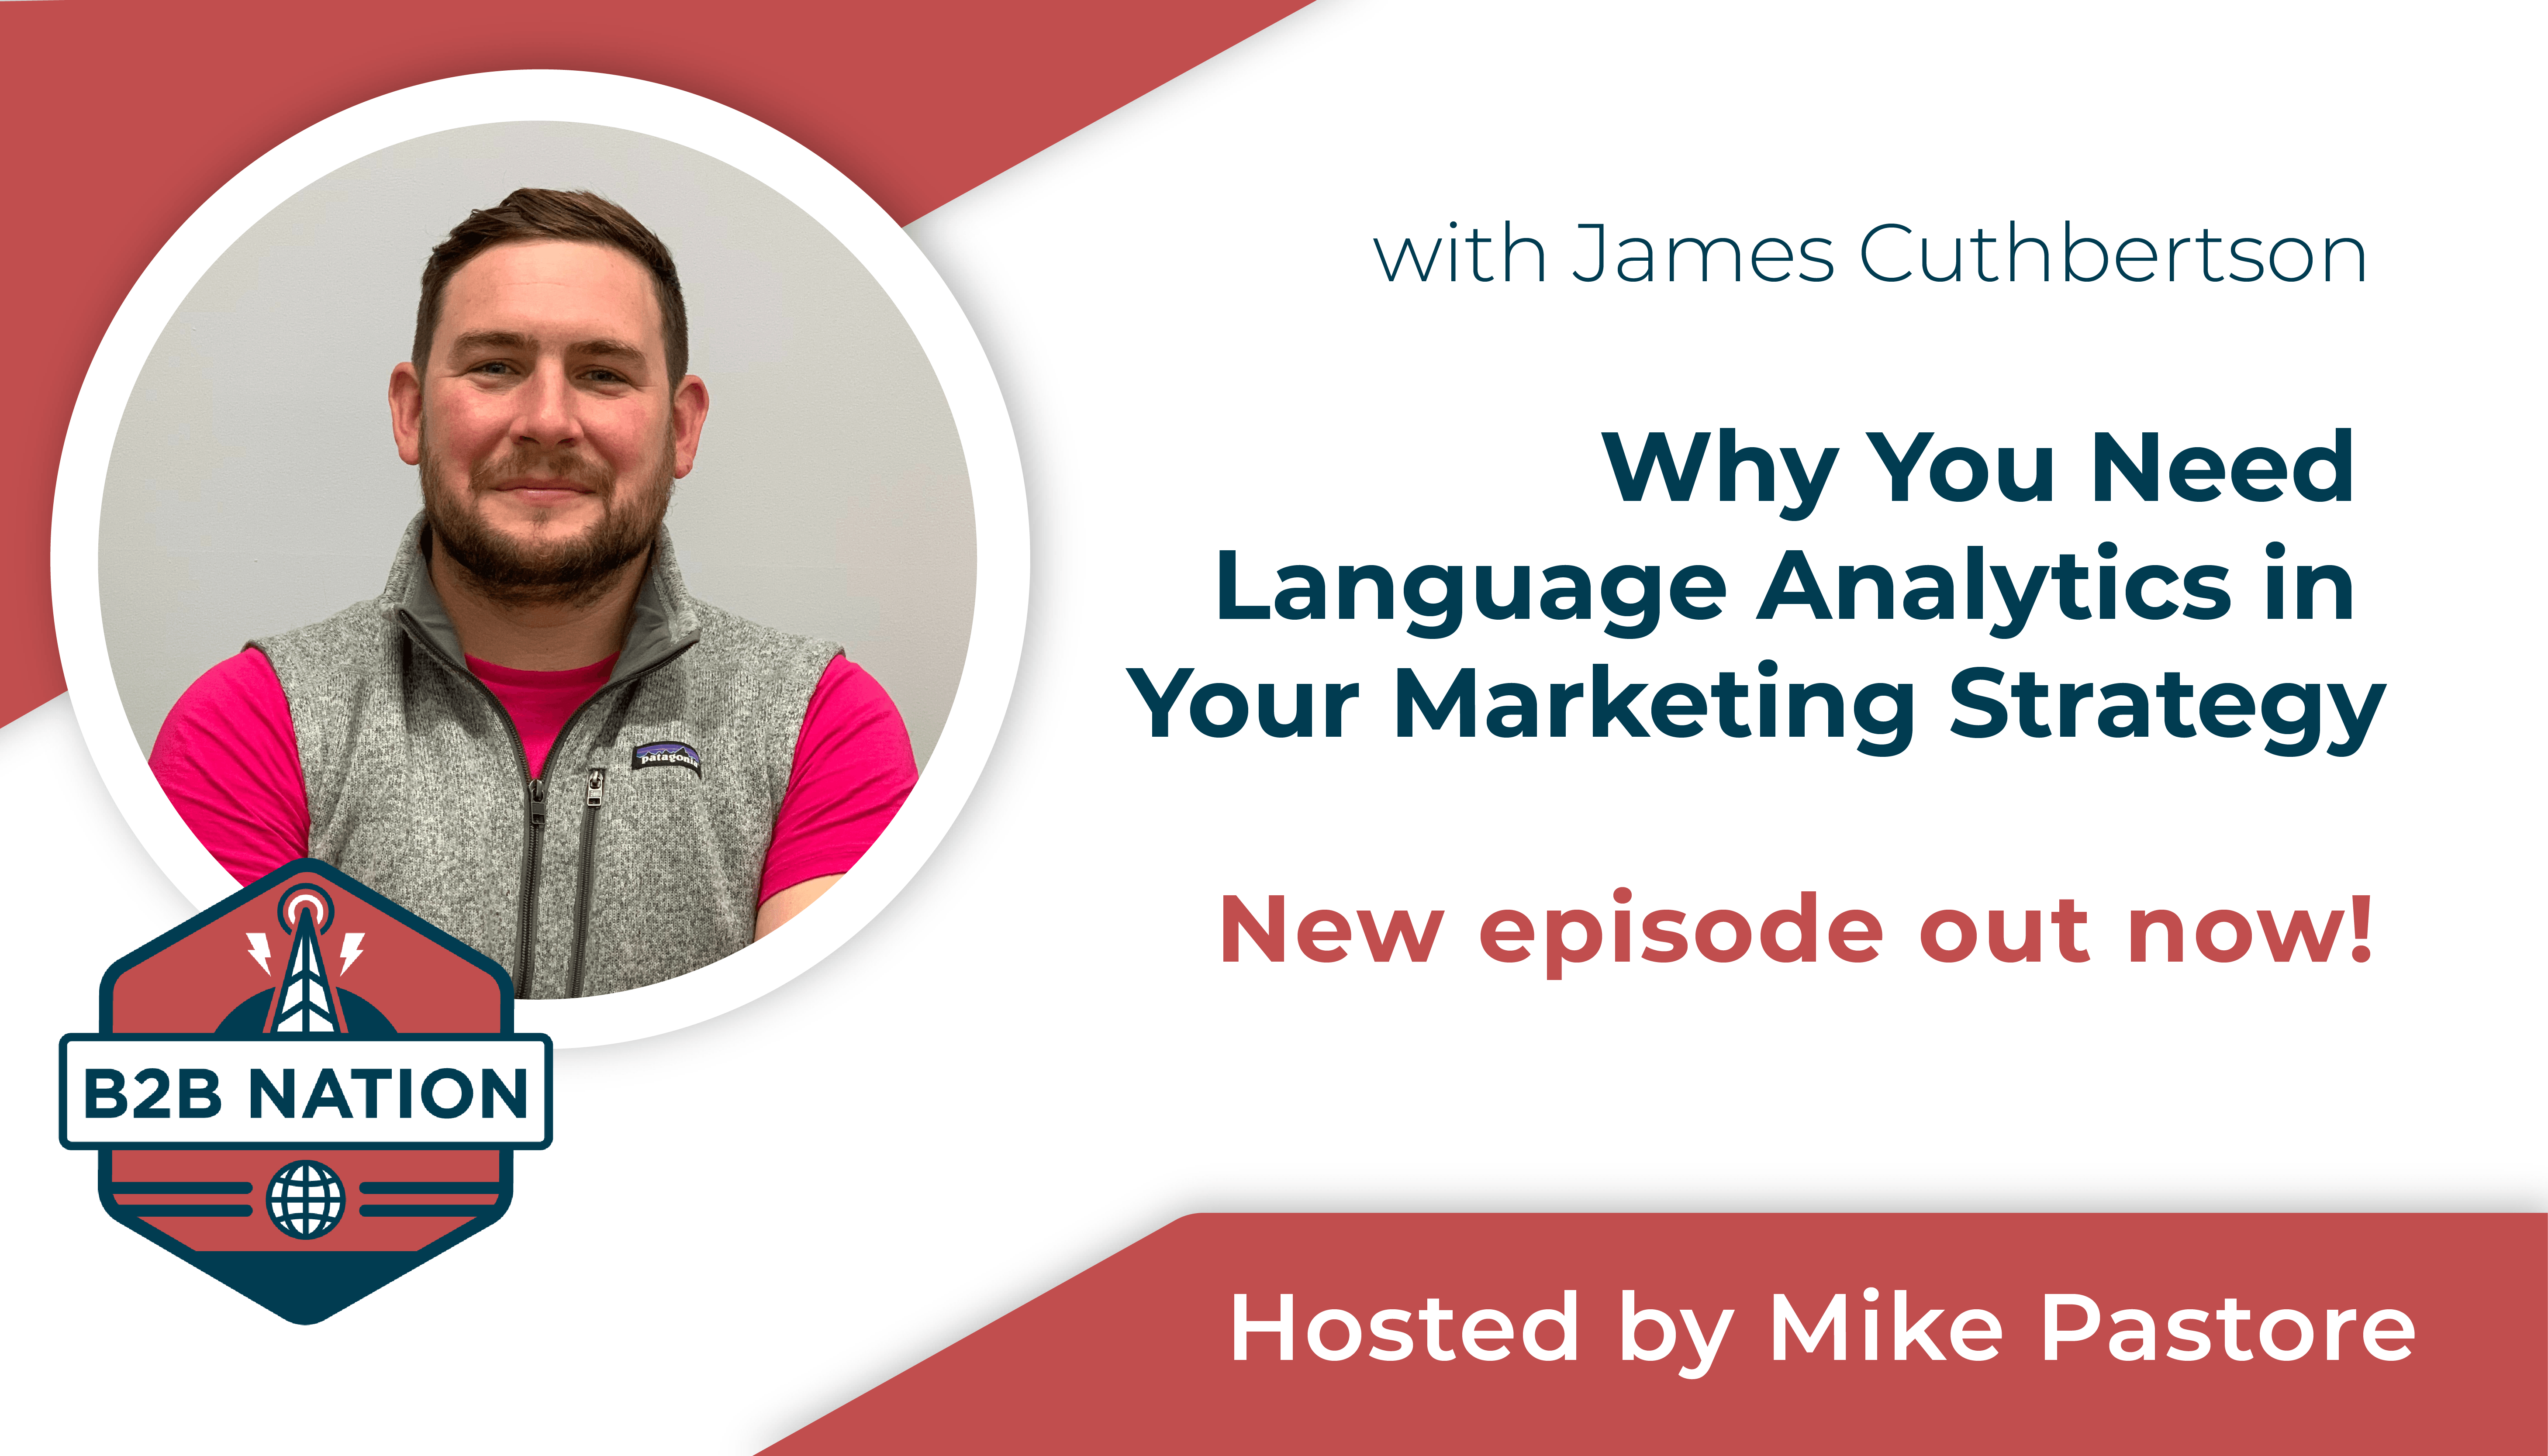 Why You Need Language Analytics in Your Marketing Strategy